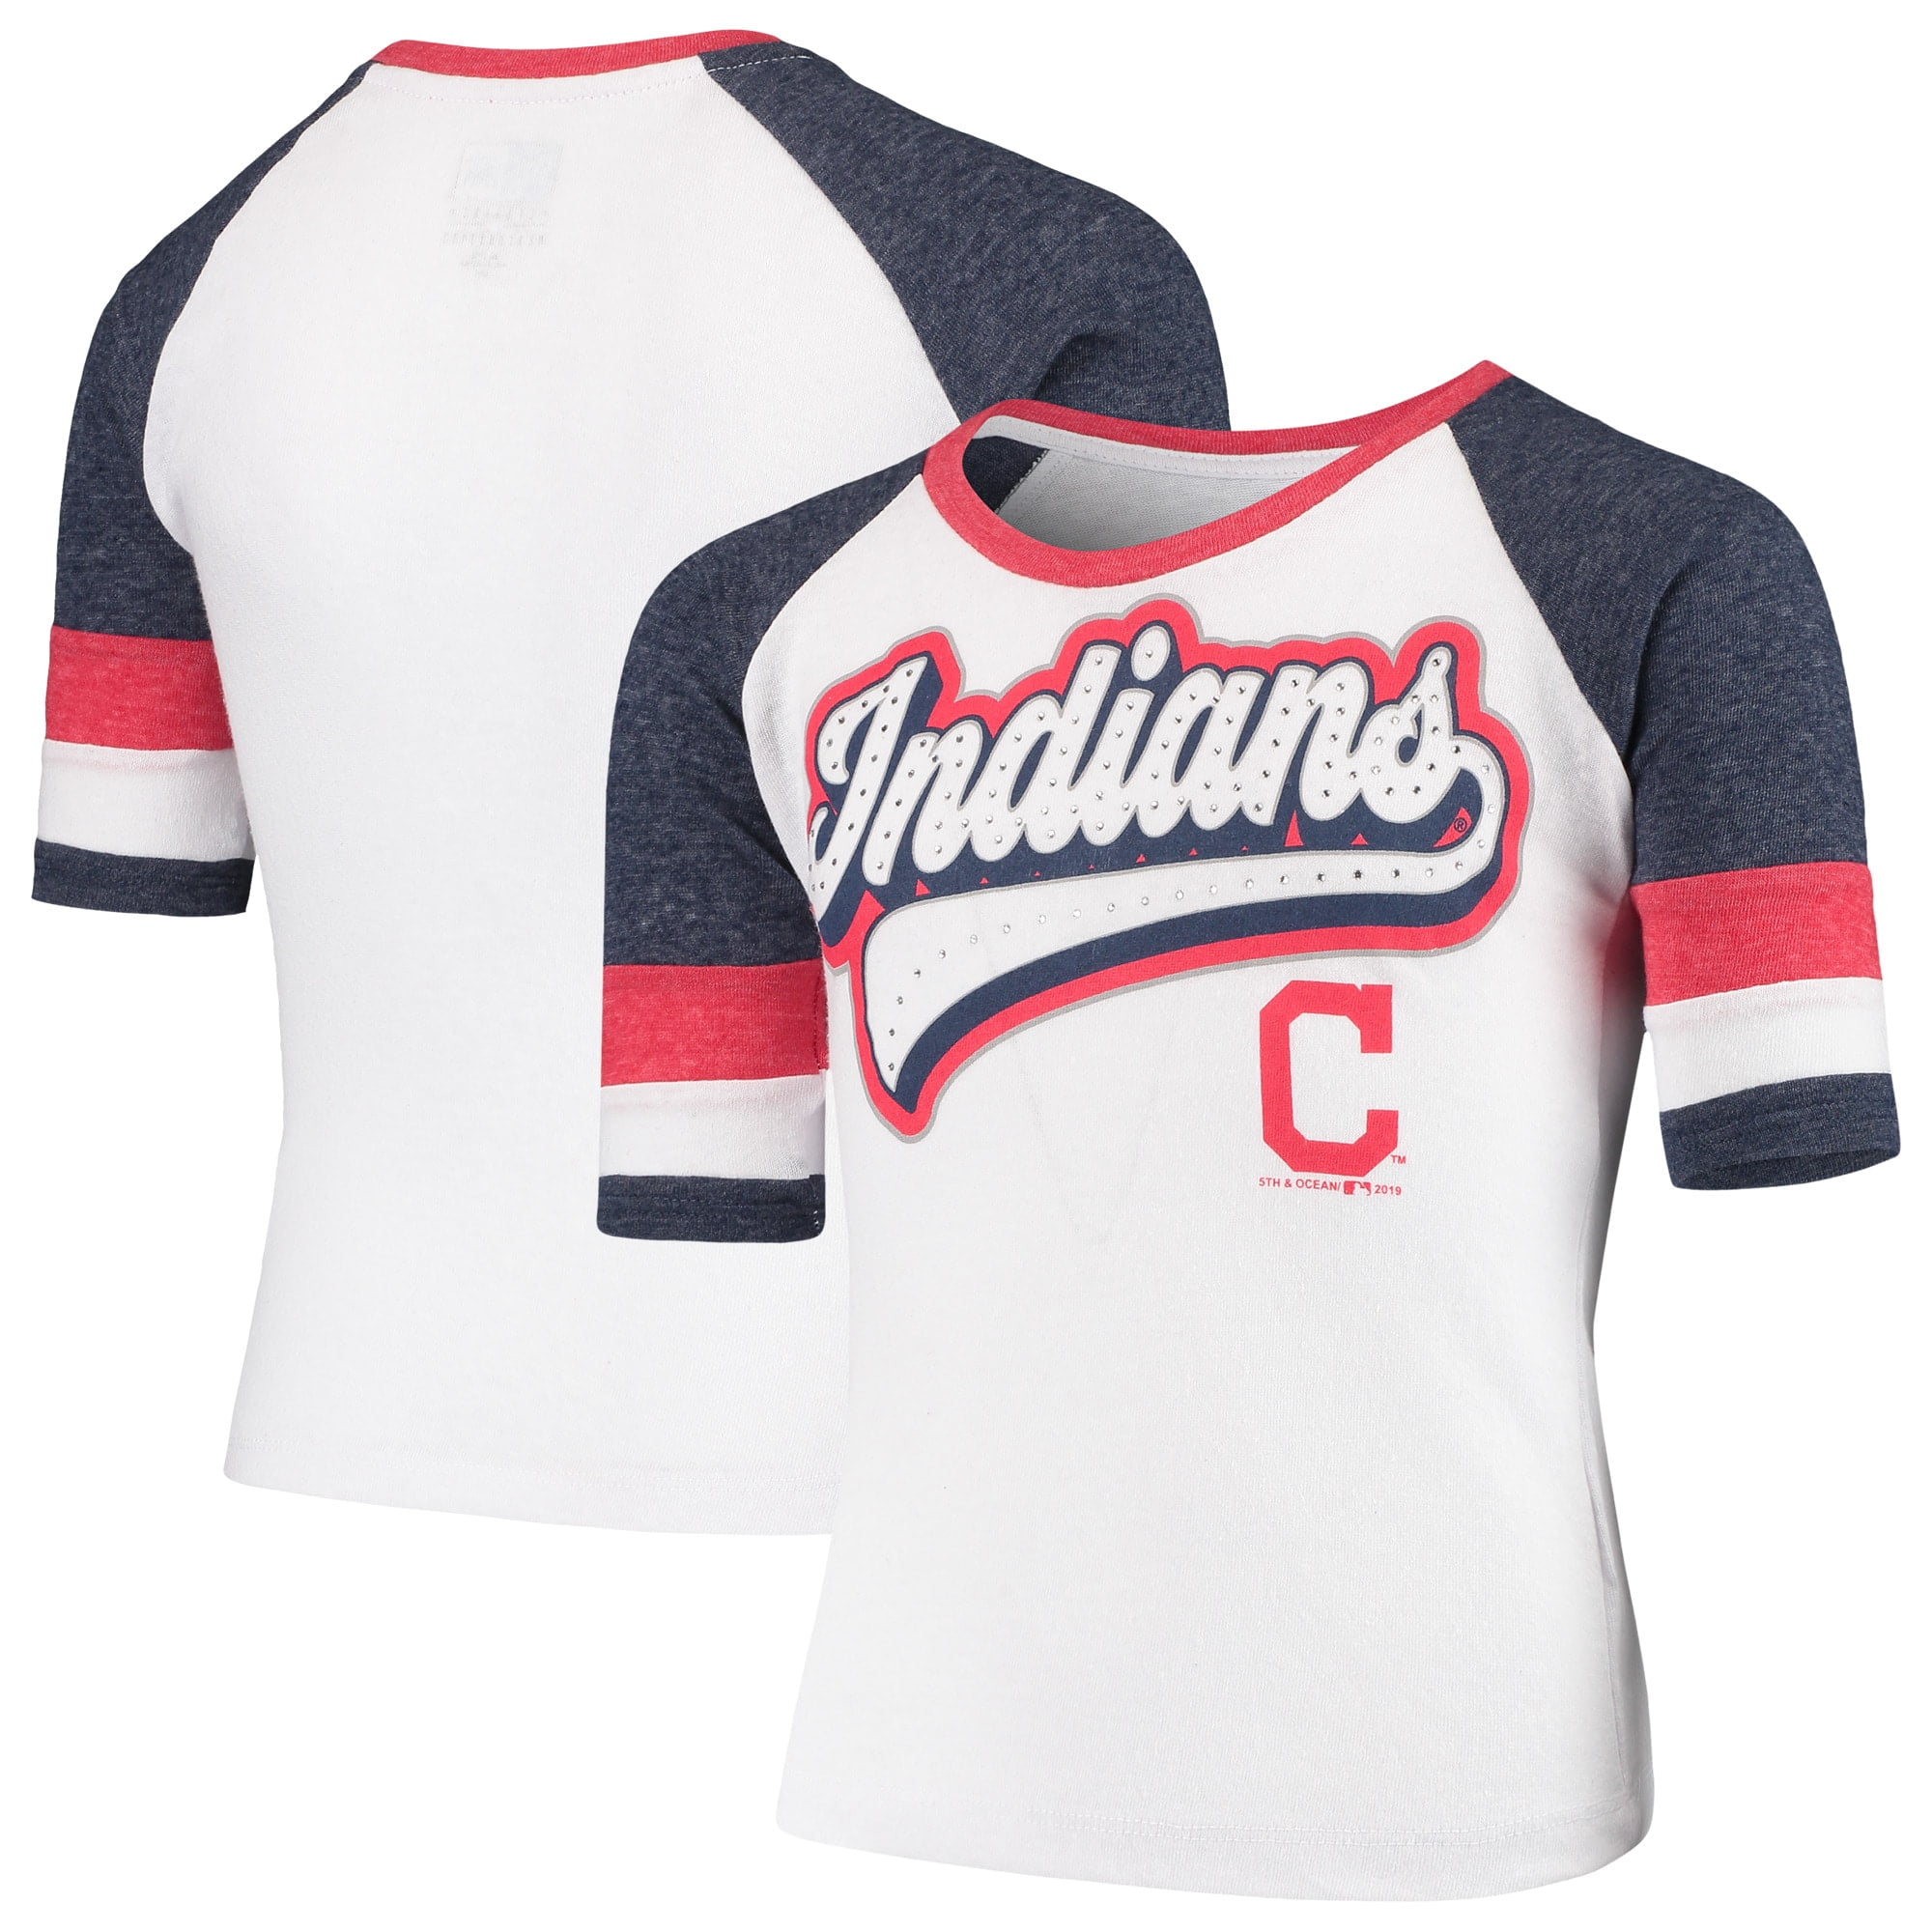 cleveland indians new jersey